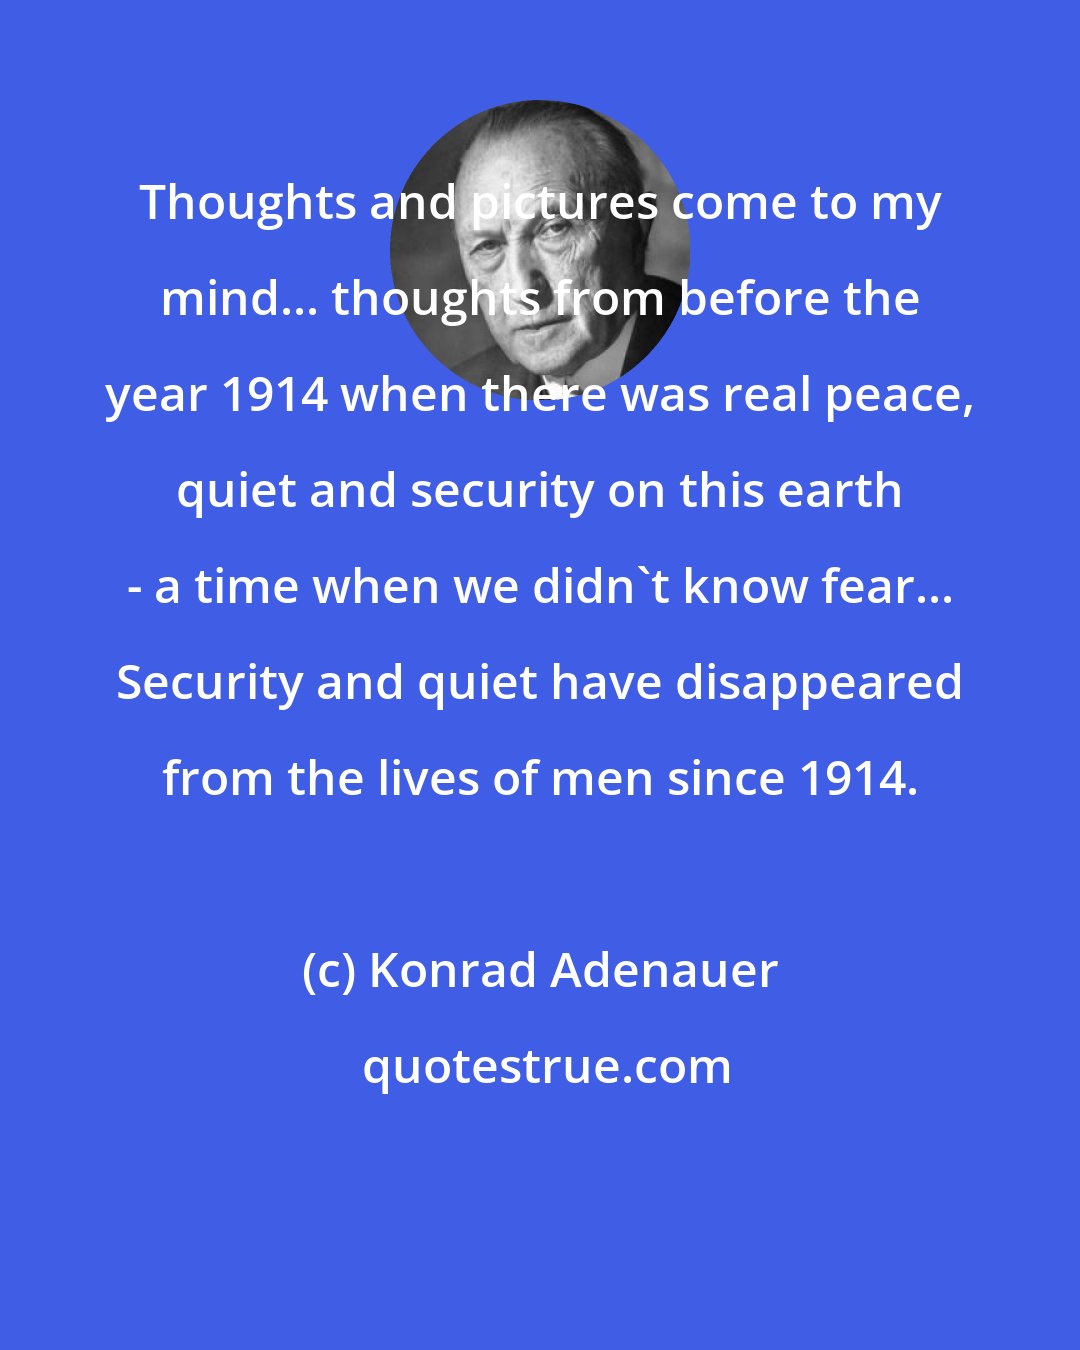 Konrad Adenauer: Thoughts and pictures come to my mind... thoughts from before the year 1914 when there was real peace, quiet and security on this earth - a time when we didn't know fear... Security and quiet have disappeared from the lives of men since 1914.